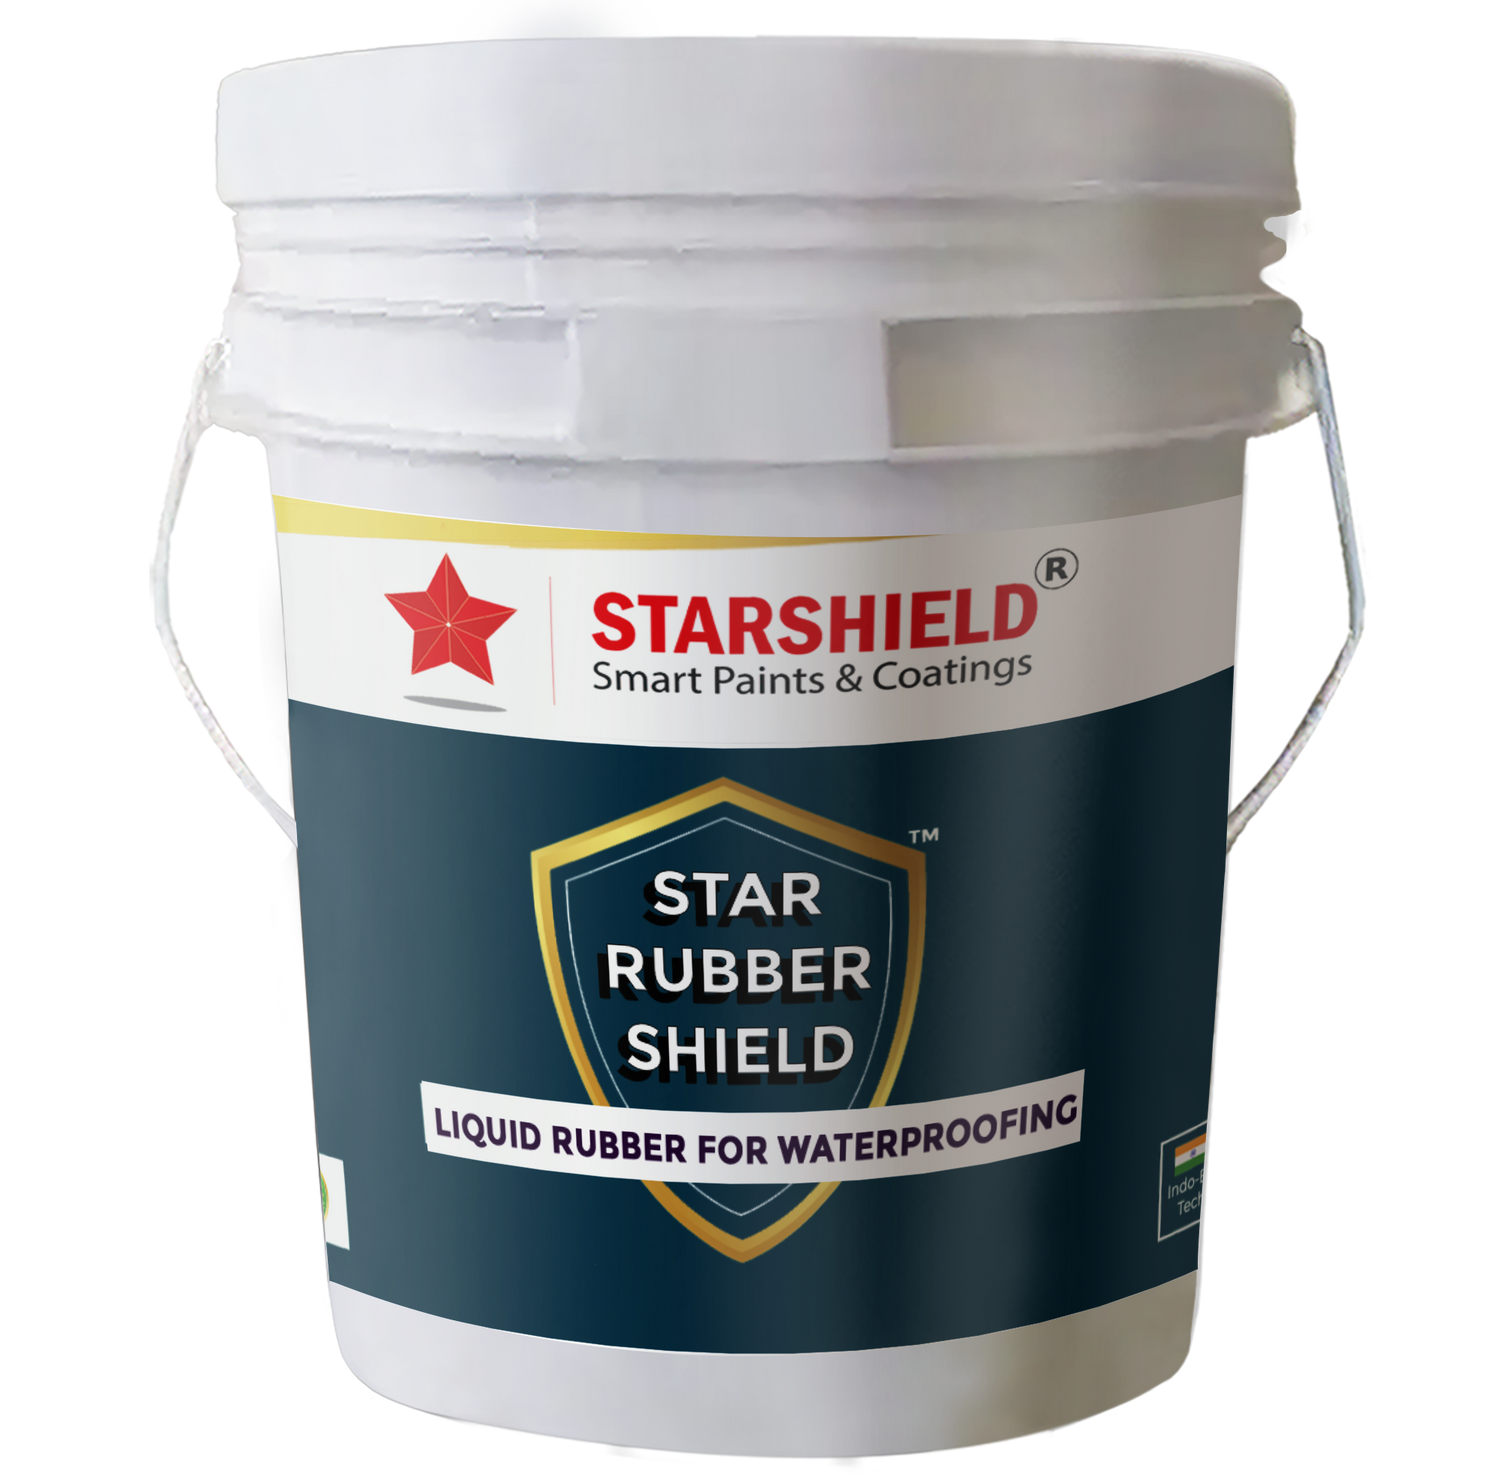 Explore Star Rubber Shield: Ideal for concrete, steel, and wood surfaces. Versatile, durable waterproofing membrane.